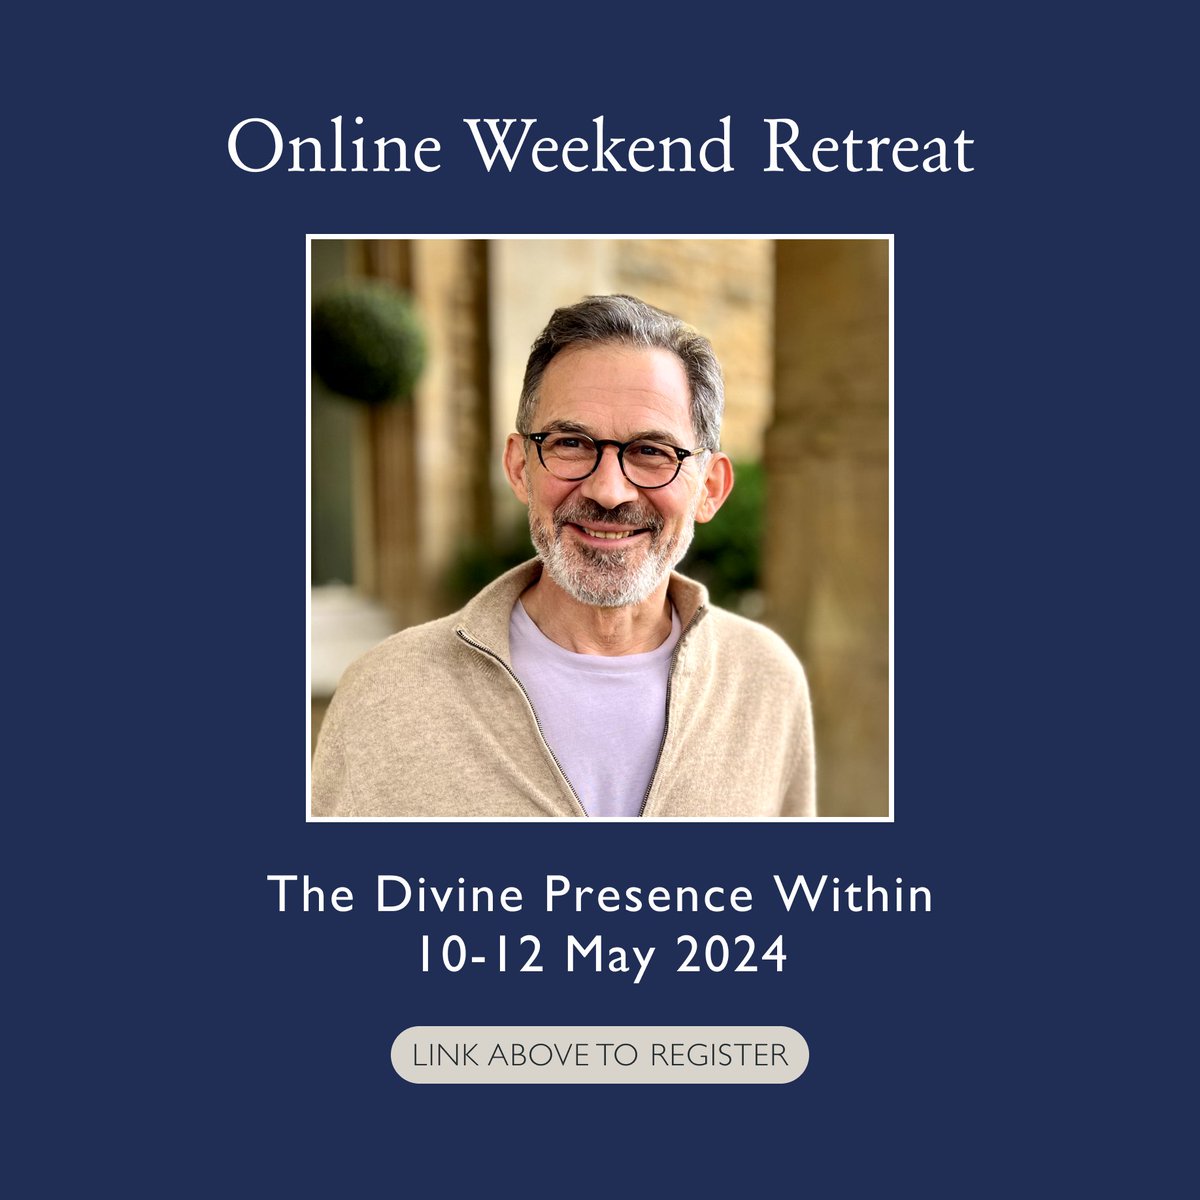 The Divine Presence Within: Rupert’s upcoming online weekend retreat at home. Join and even make new friends all around the world, 10–12 May. Secure your place here: bit.ly/3uZgIIz